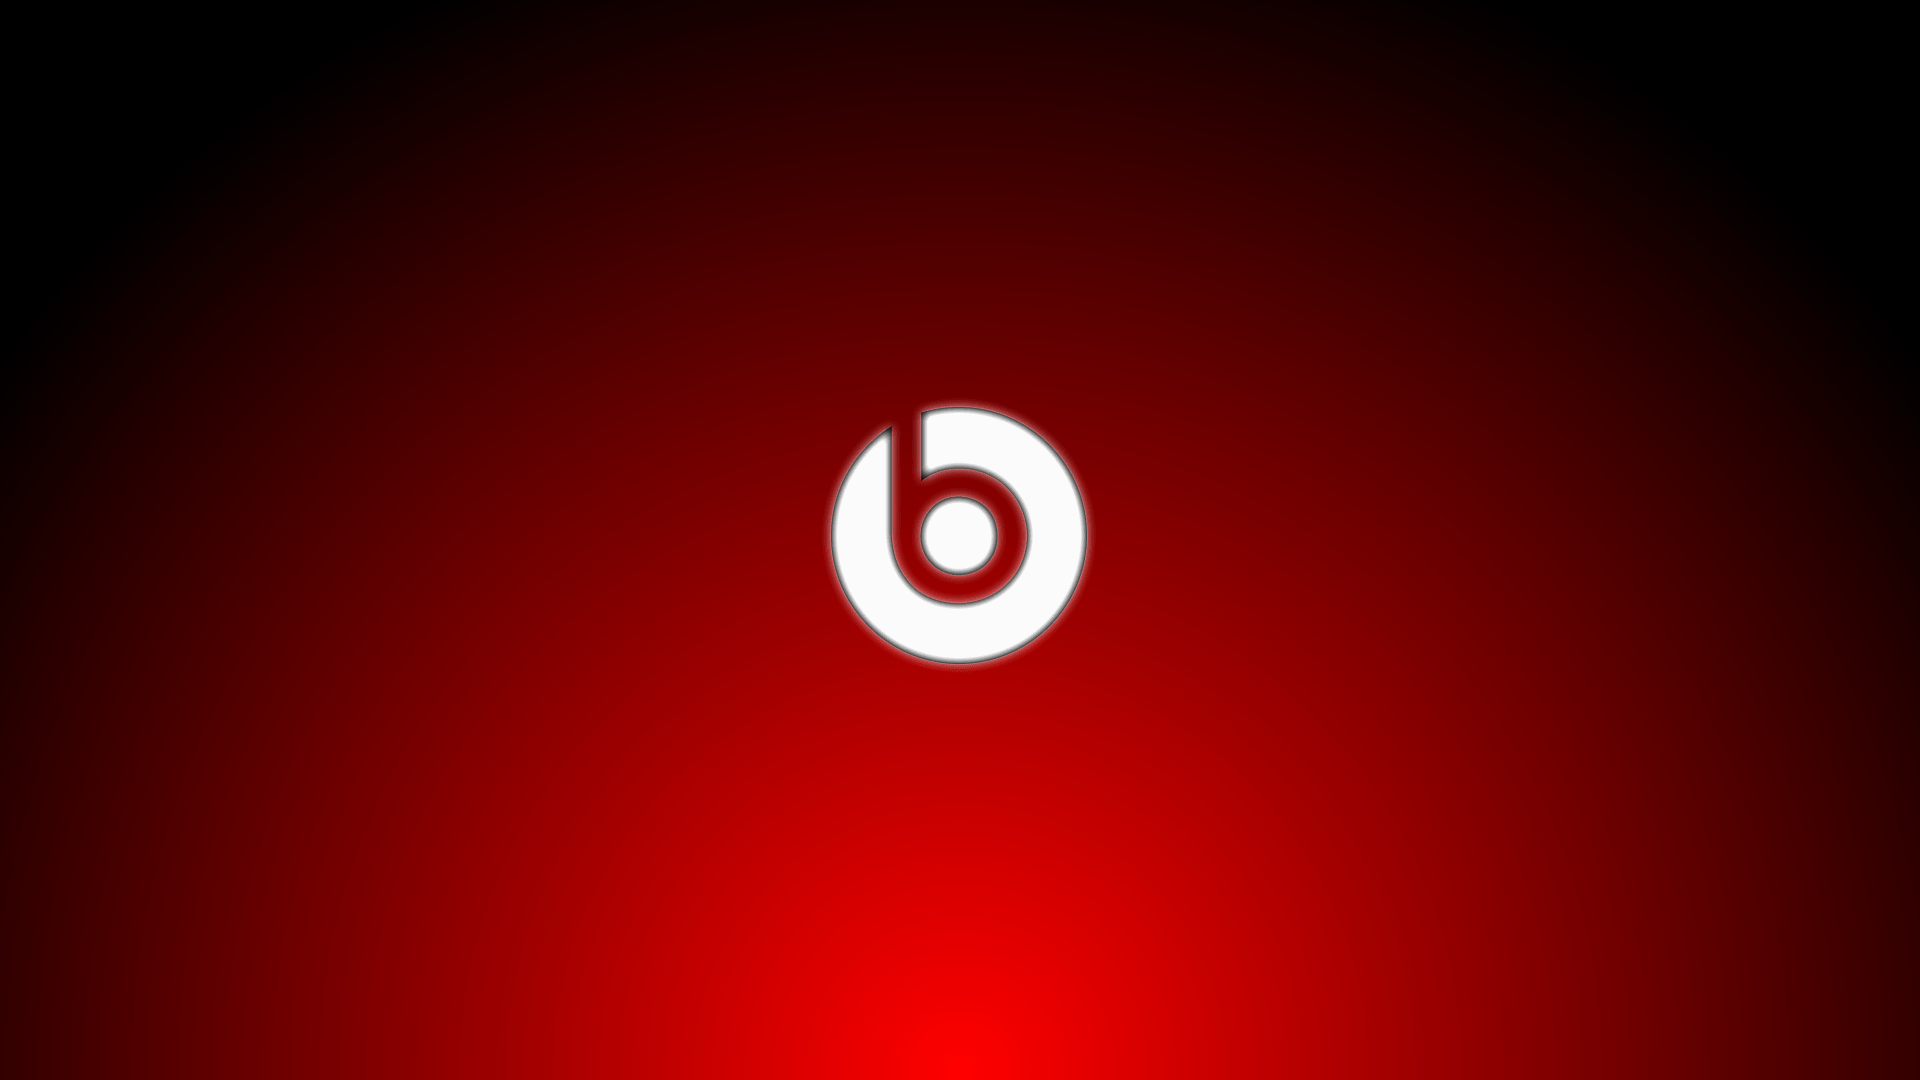 Red Beats Logo - Red And White Beats Logo Wallpaper | PaperPull